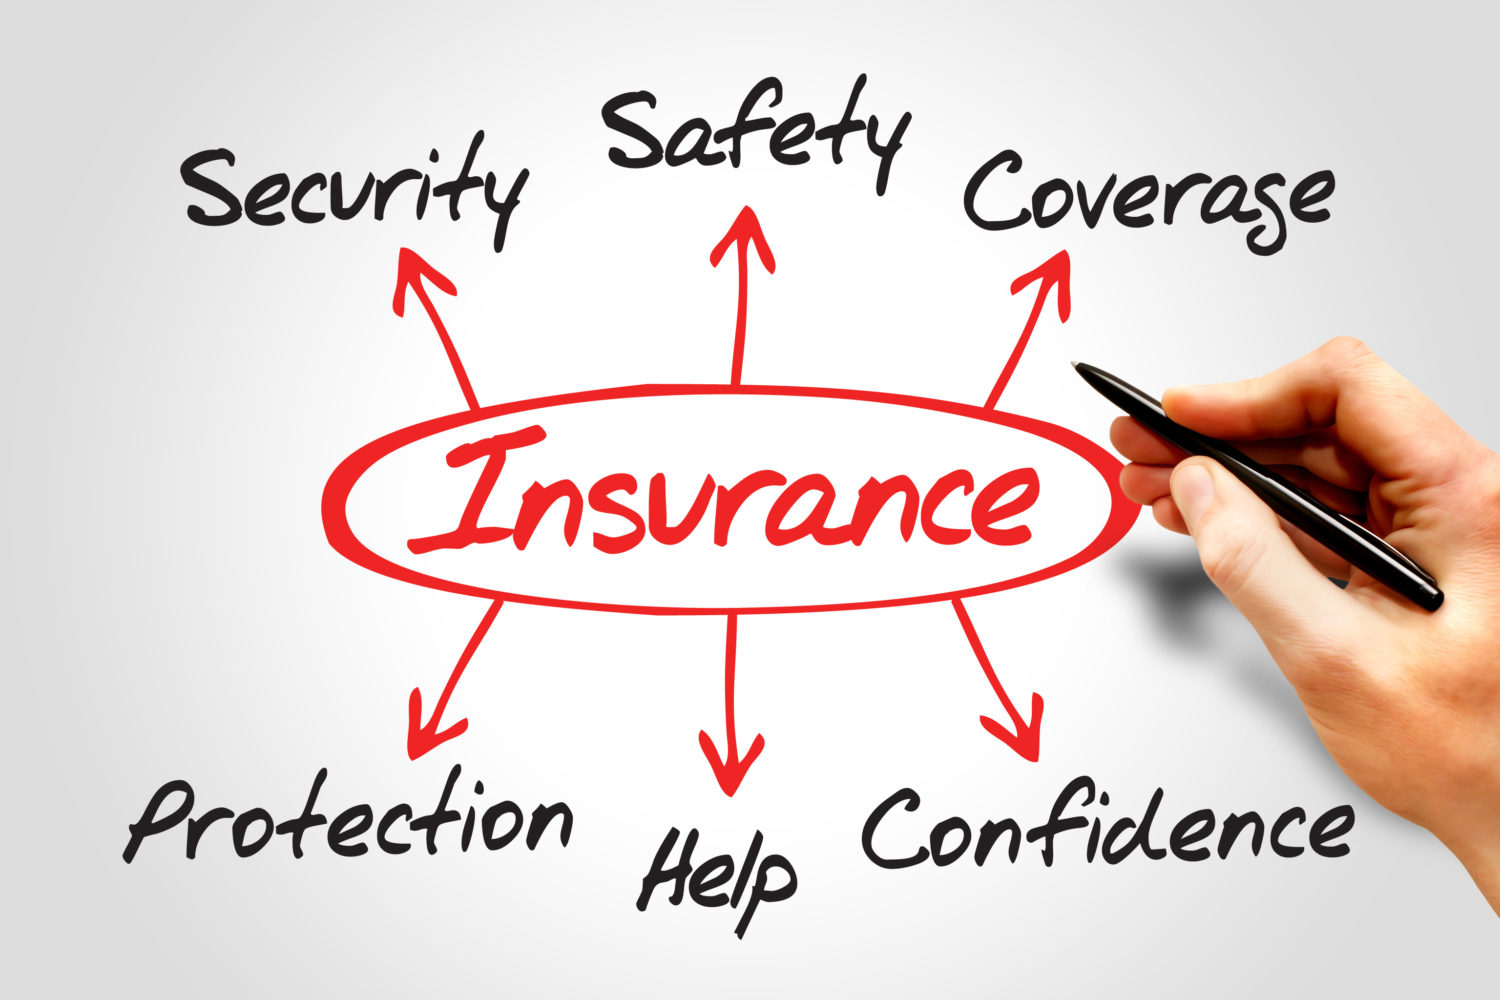 Commercial package insurance for your business from Wade Insurance Agency in Springboro Ohio.